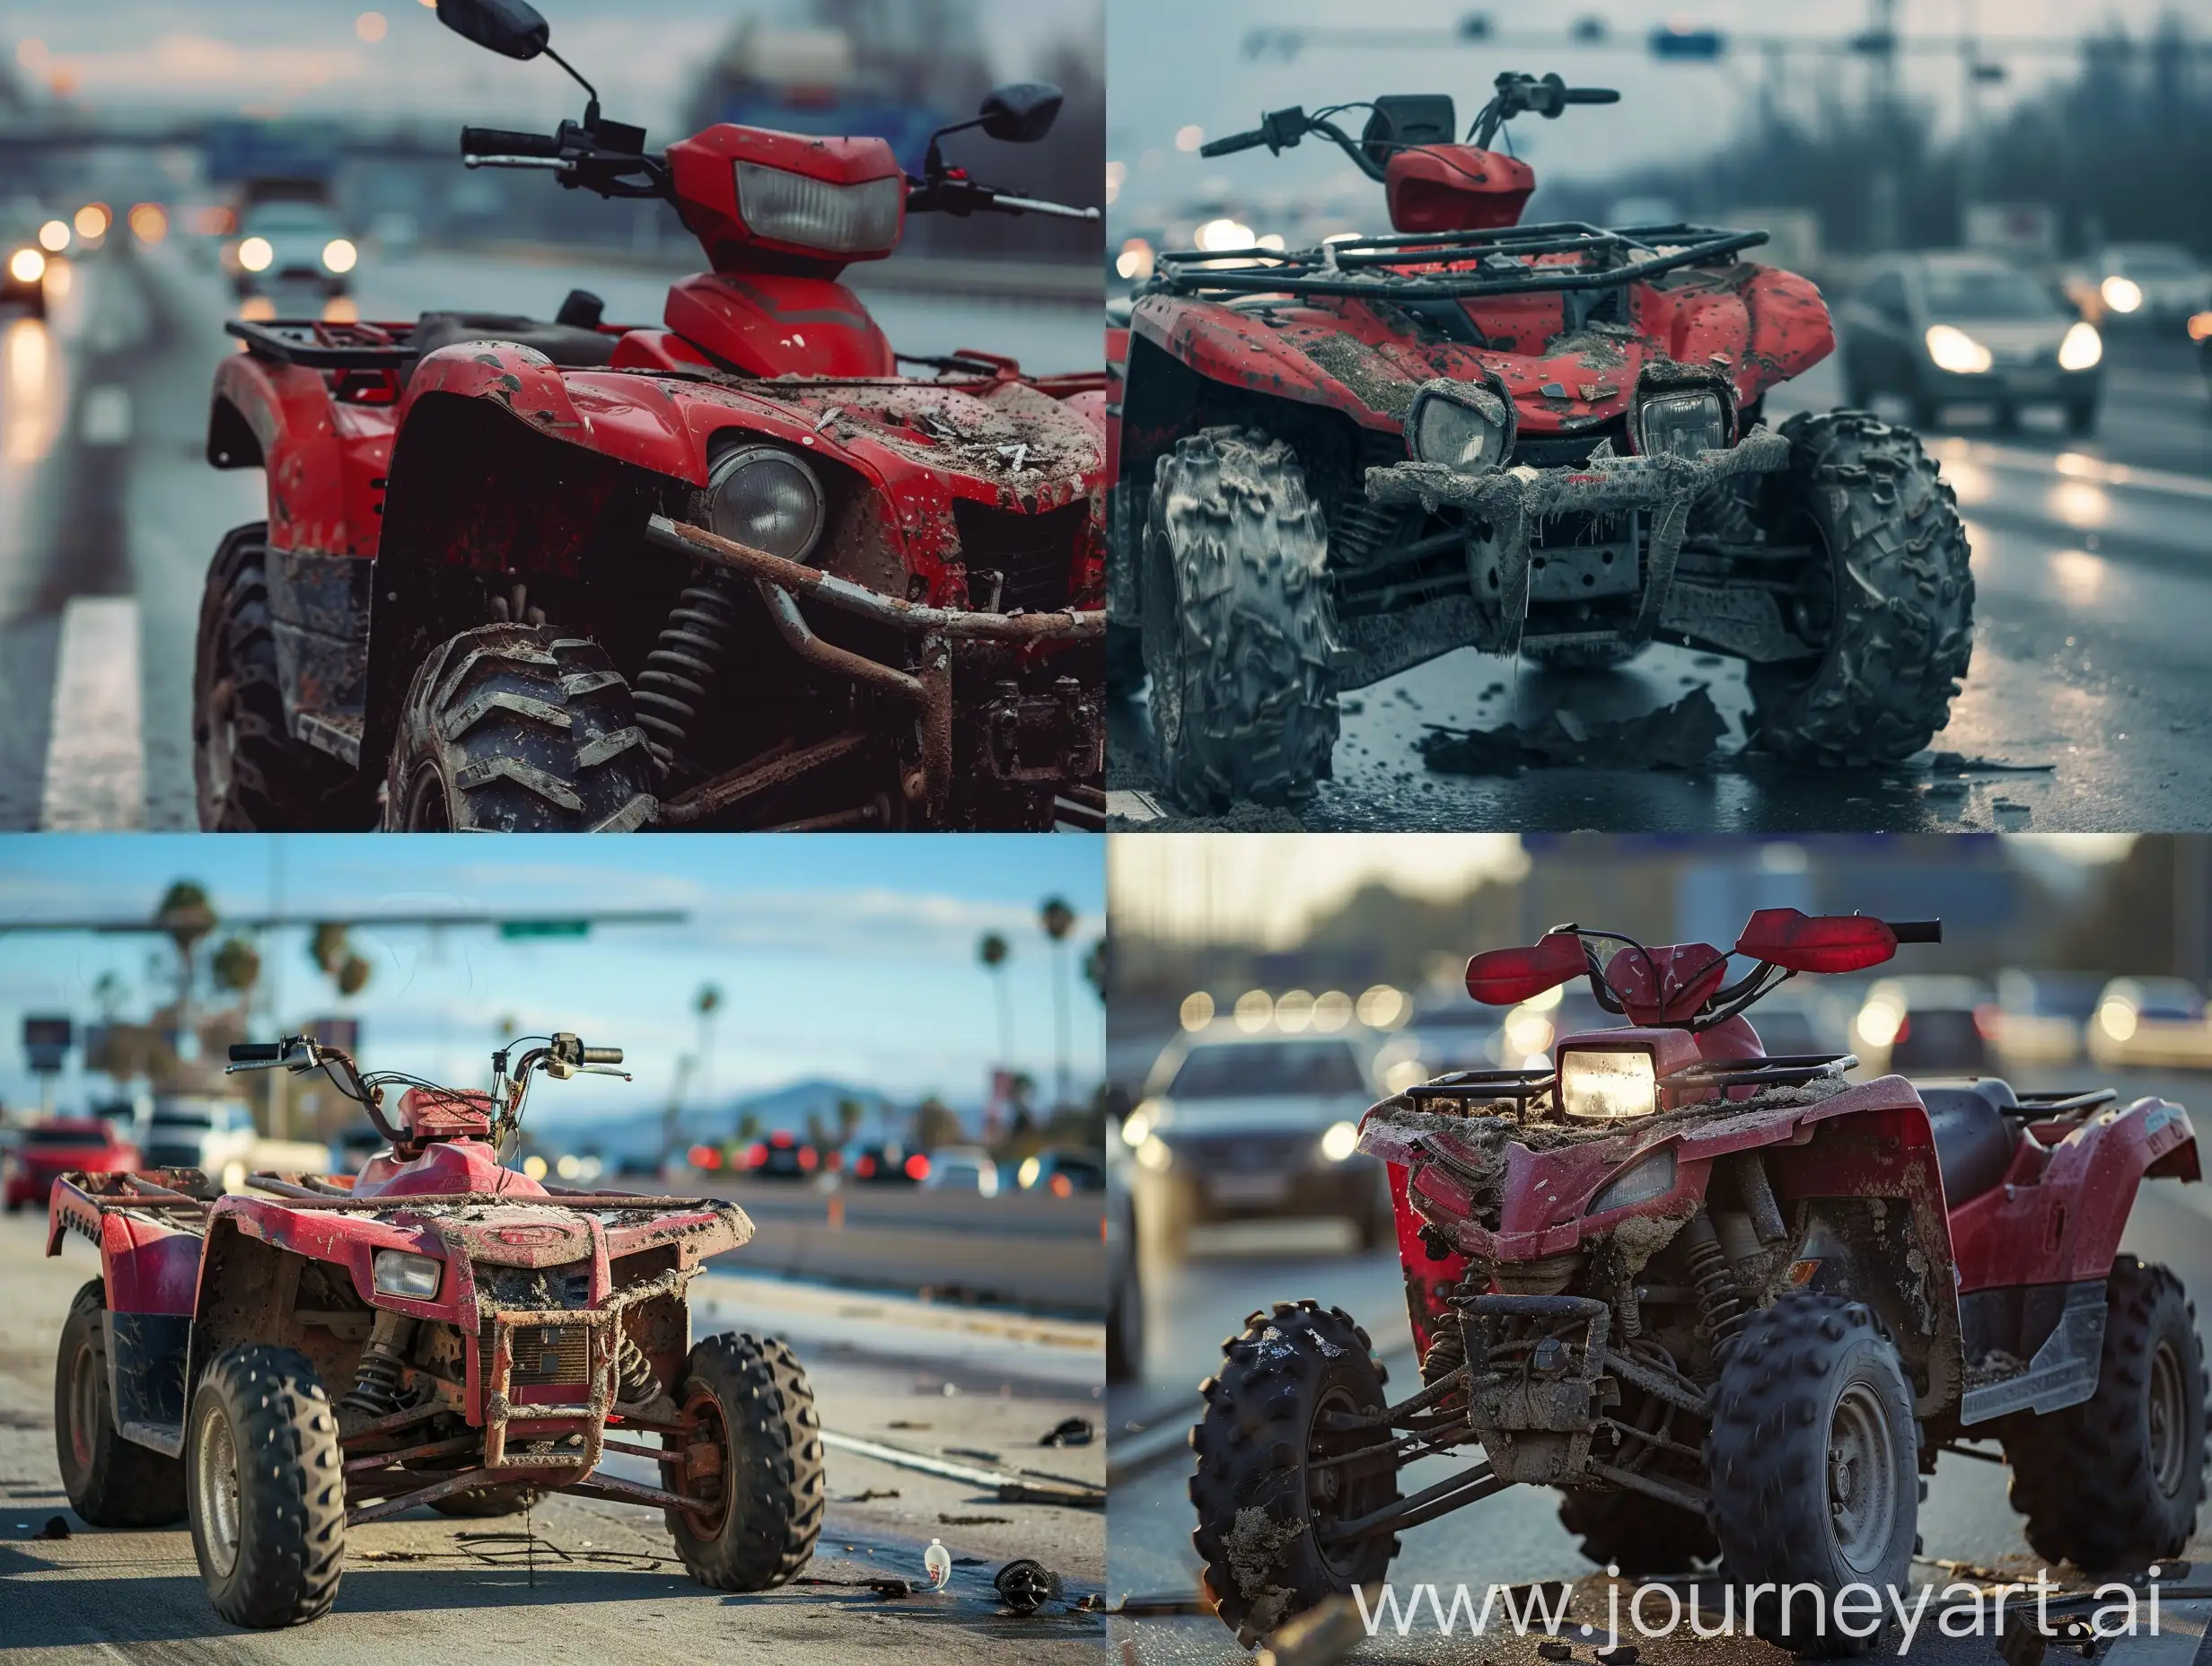 A broken red ATV is parked on a busy highway. The ATV has no headlights, the entire front part is broken